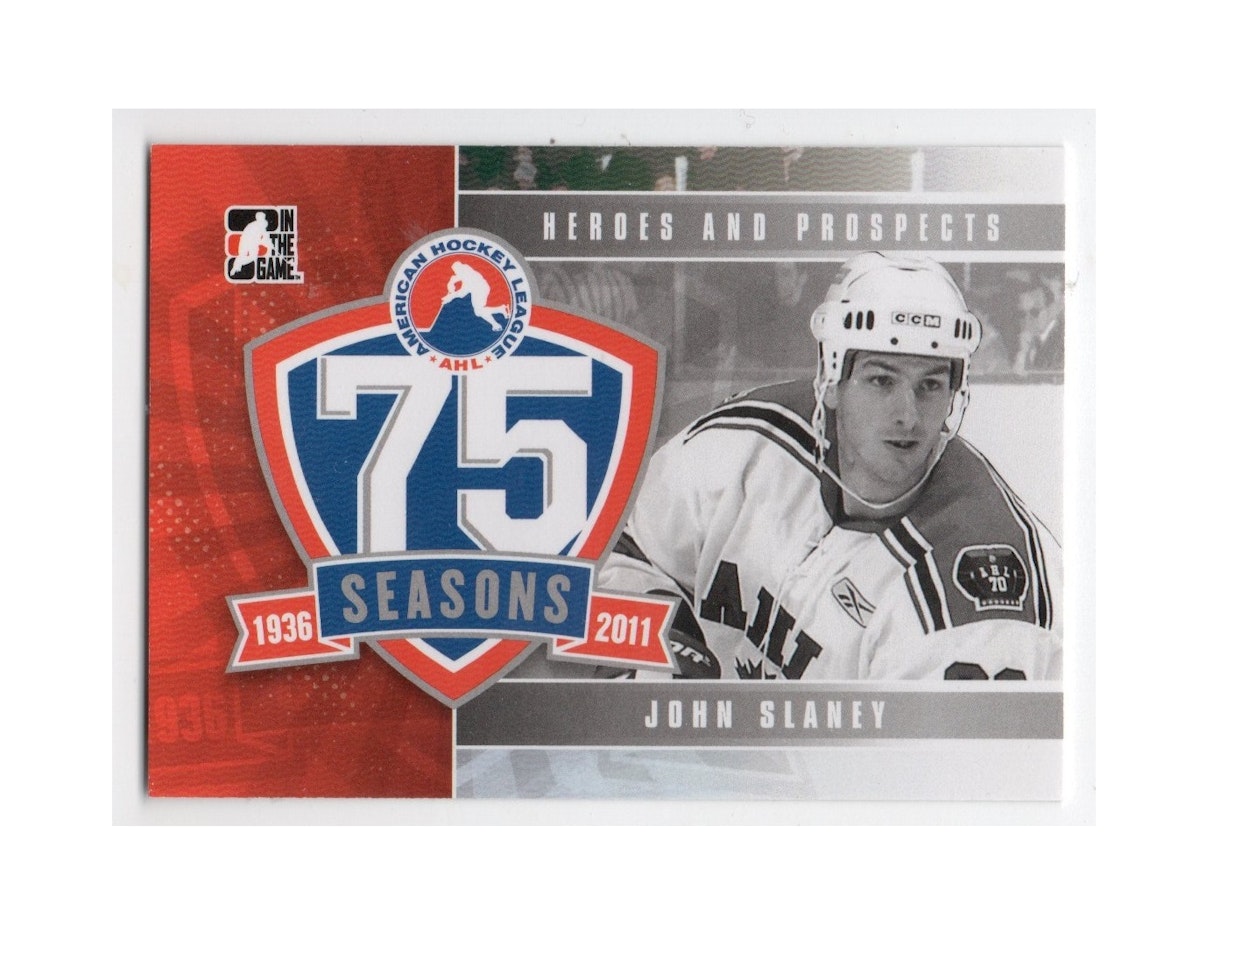 2010-11 ITG Heroes and Prospects AHL 75th Anniversary #AHLA17 John Slaney (20-X147-OTHERS)